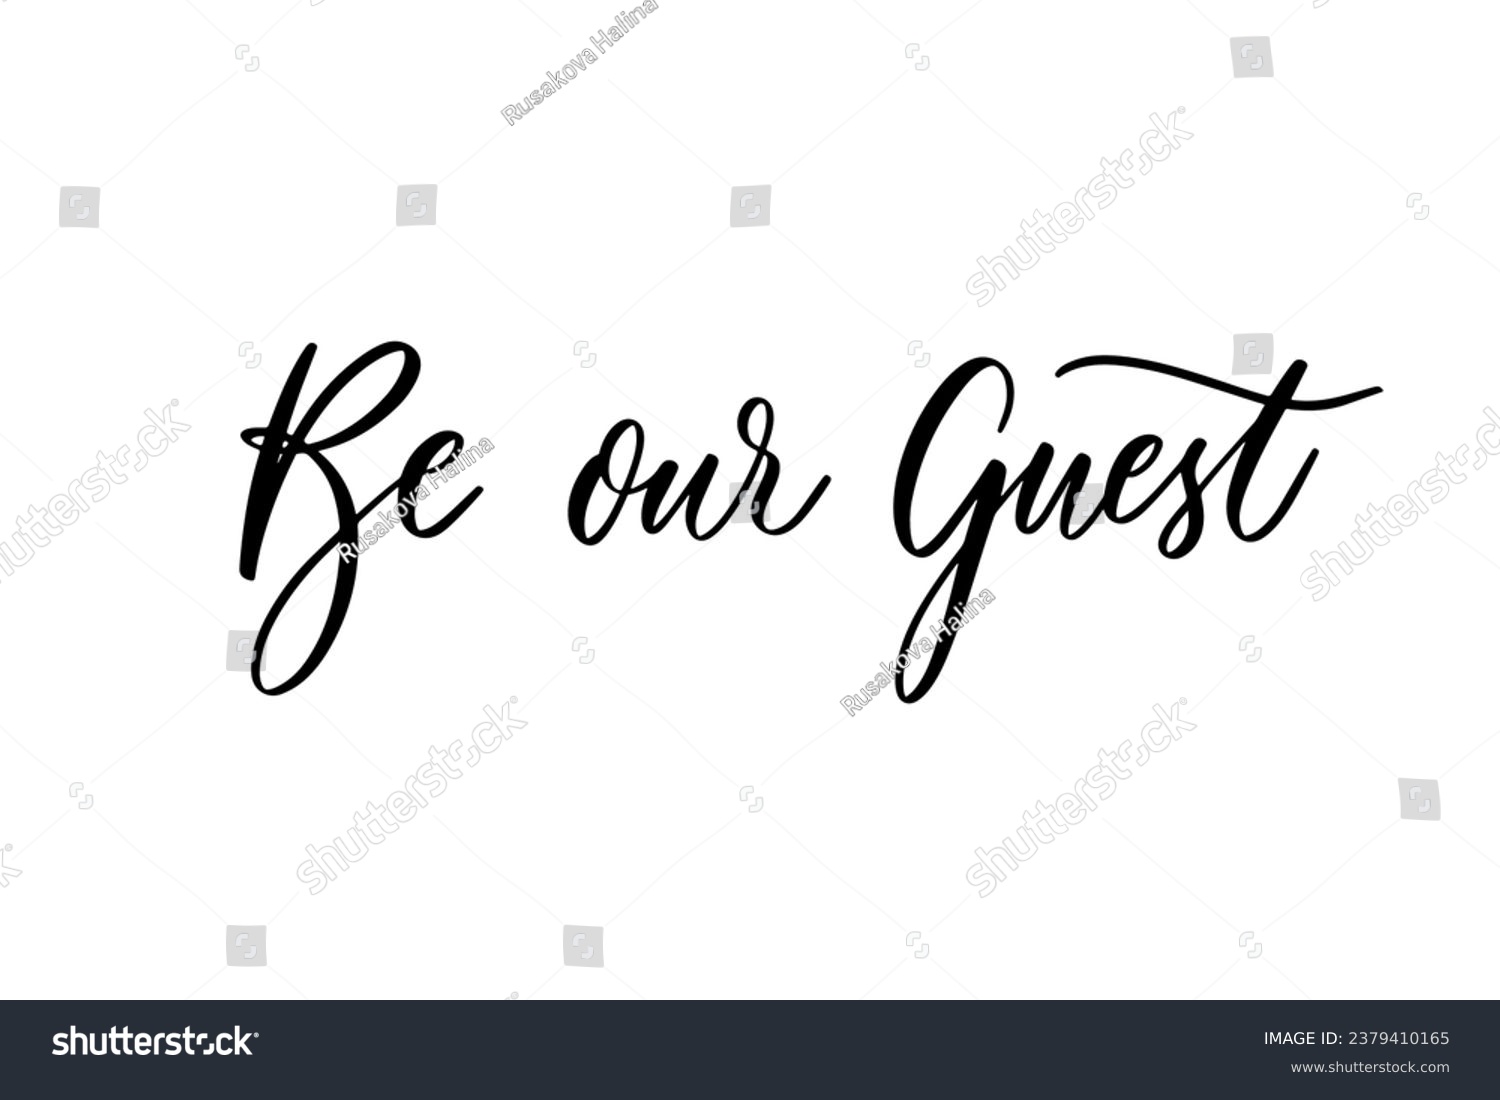 SVG of Be our guest - calligraphic inscription for wedding invitation svg